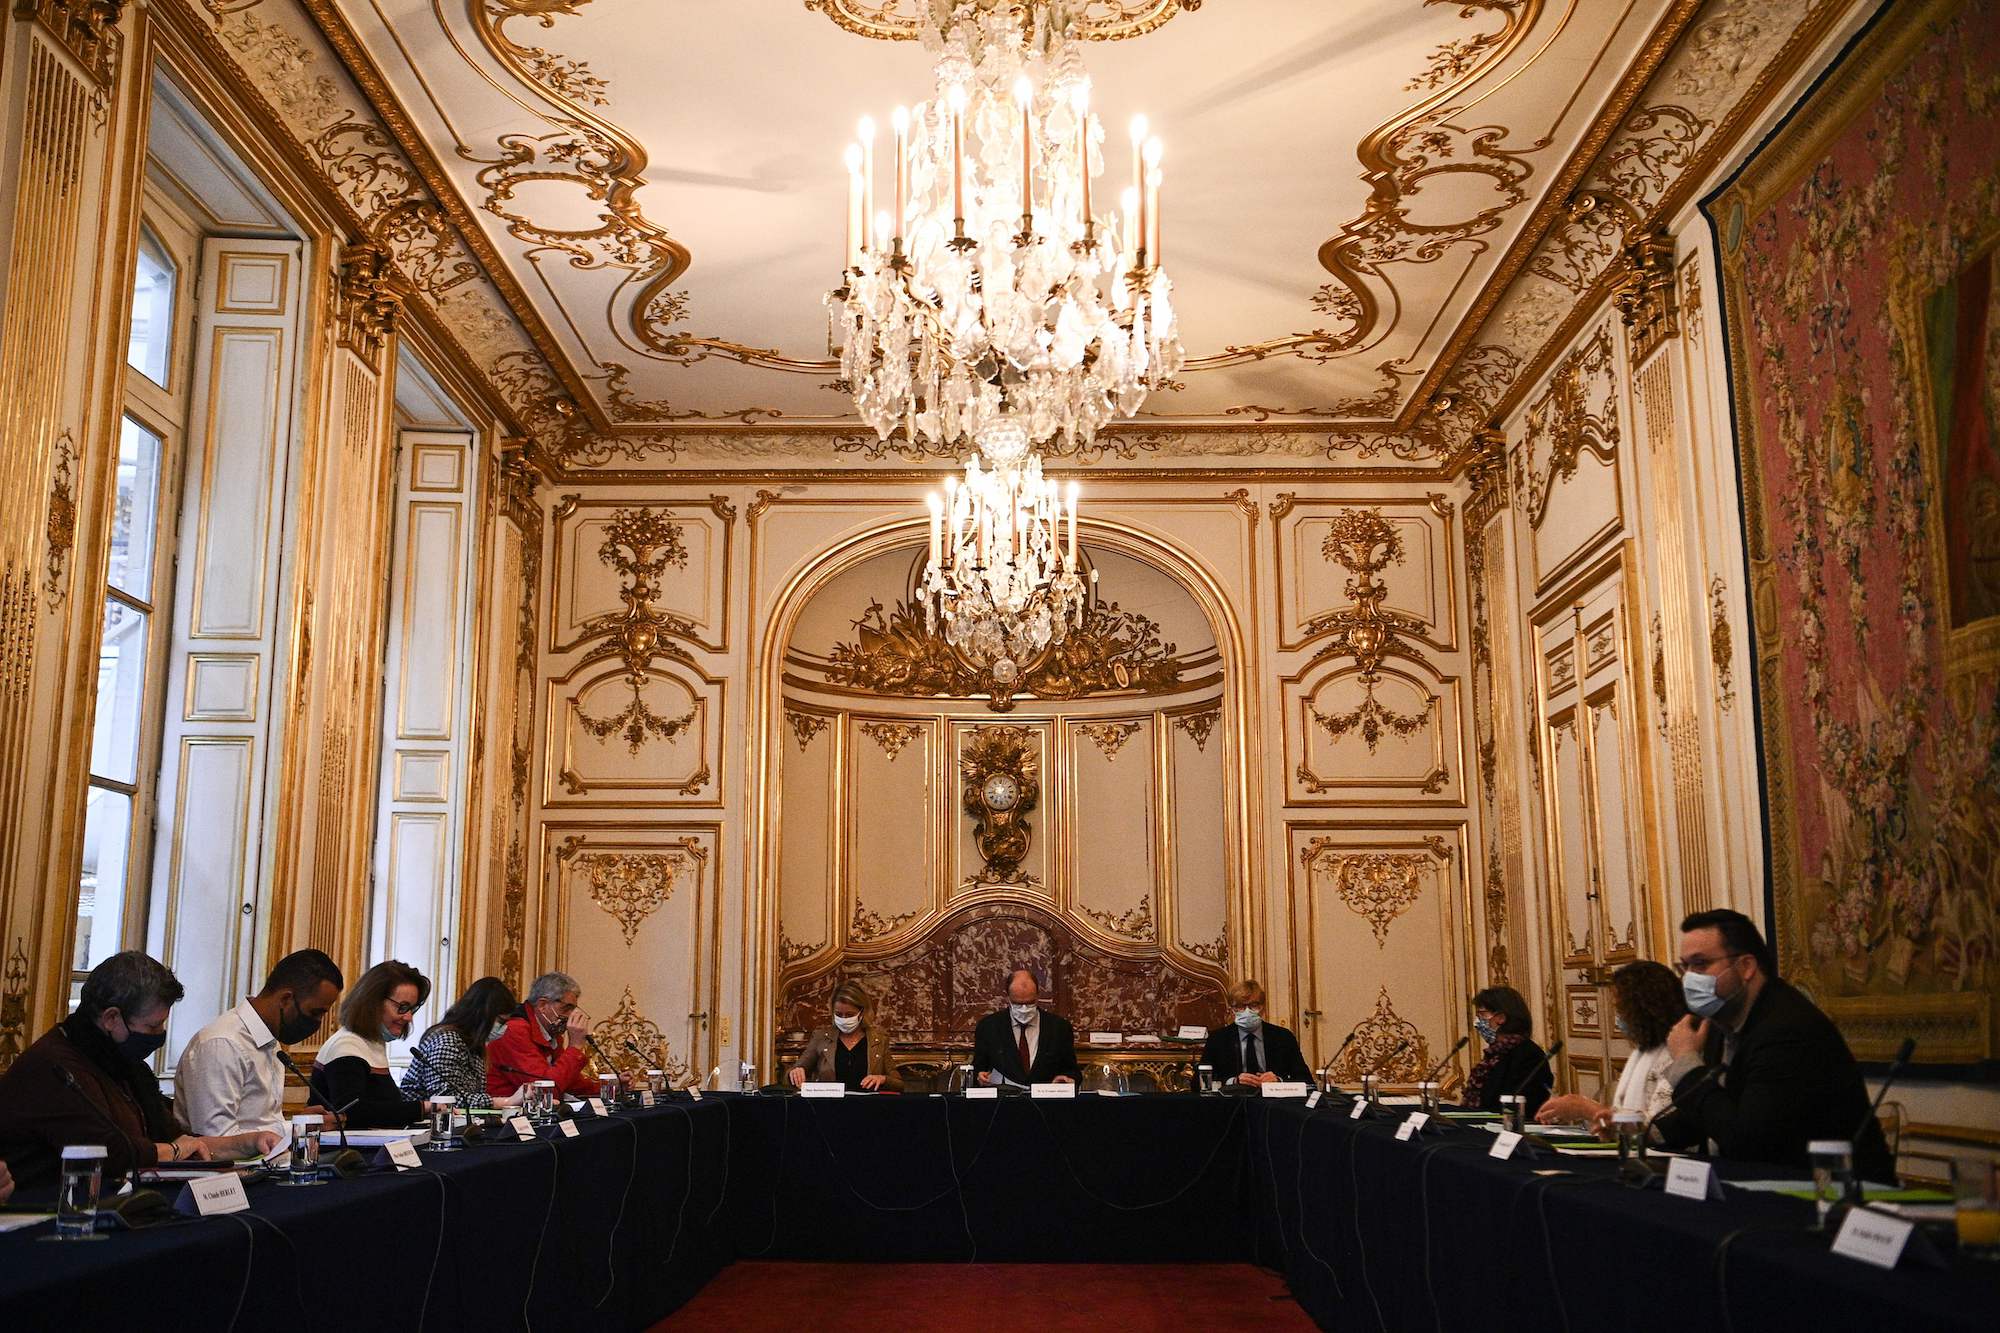 a gilded room with giant chandelier and long tables with people sitting at them discussing